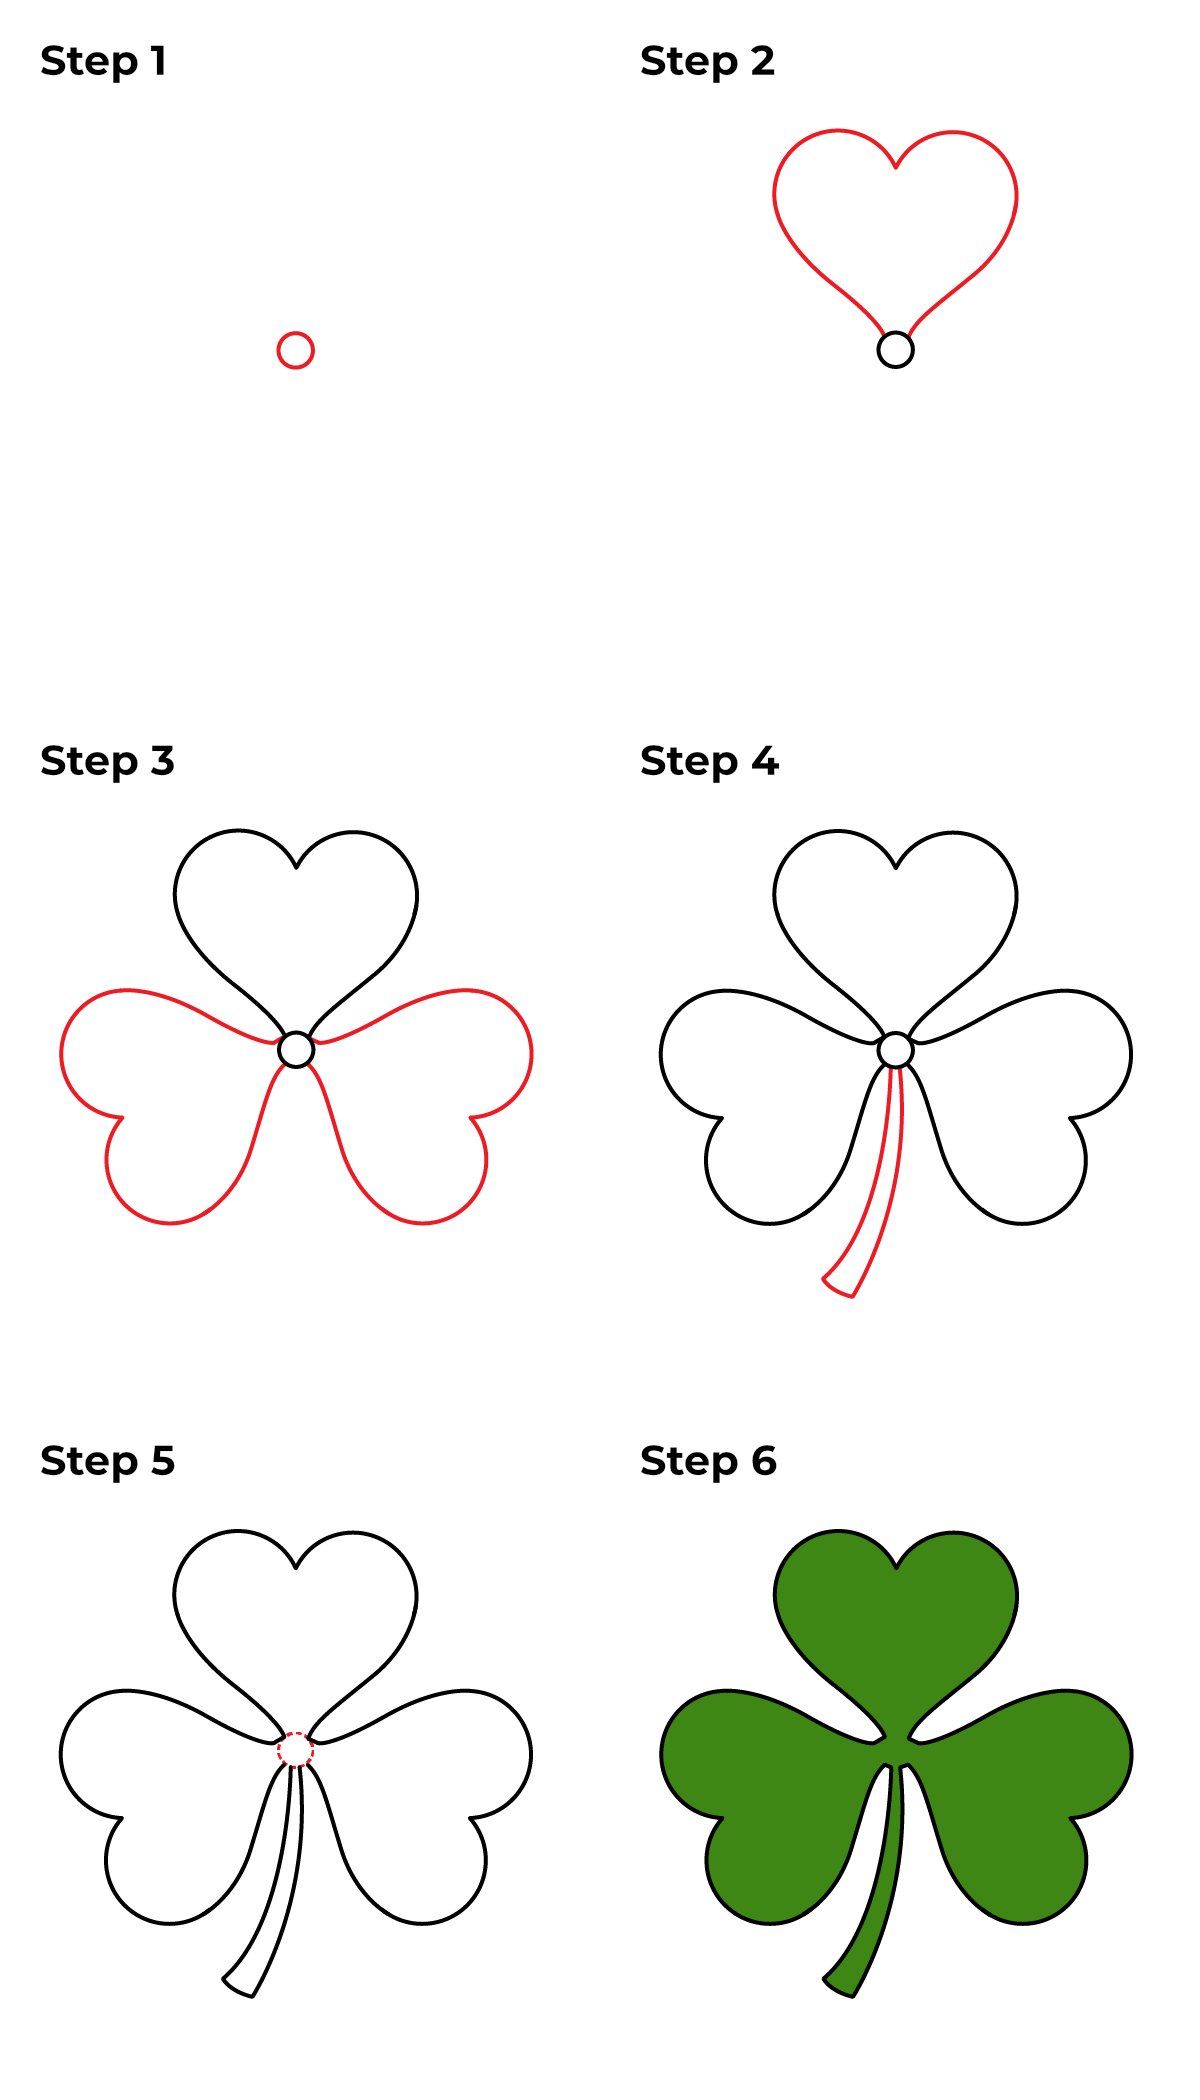 How to Draw a Shamrock